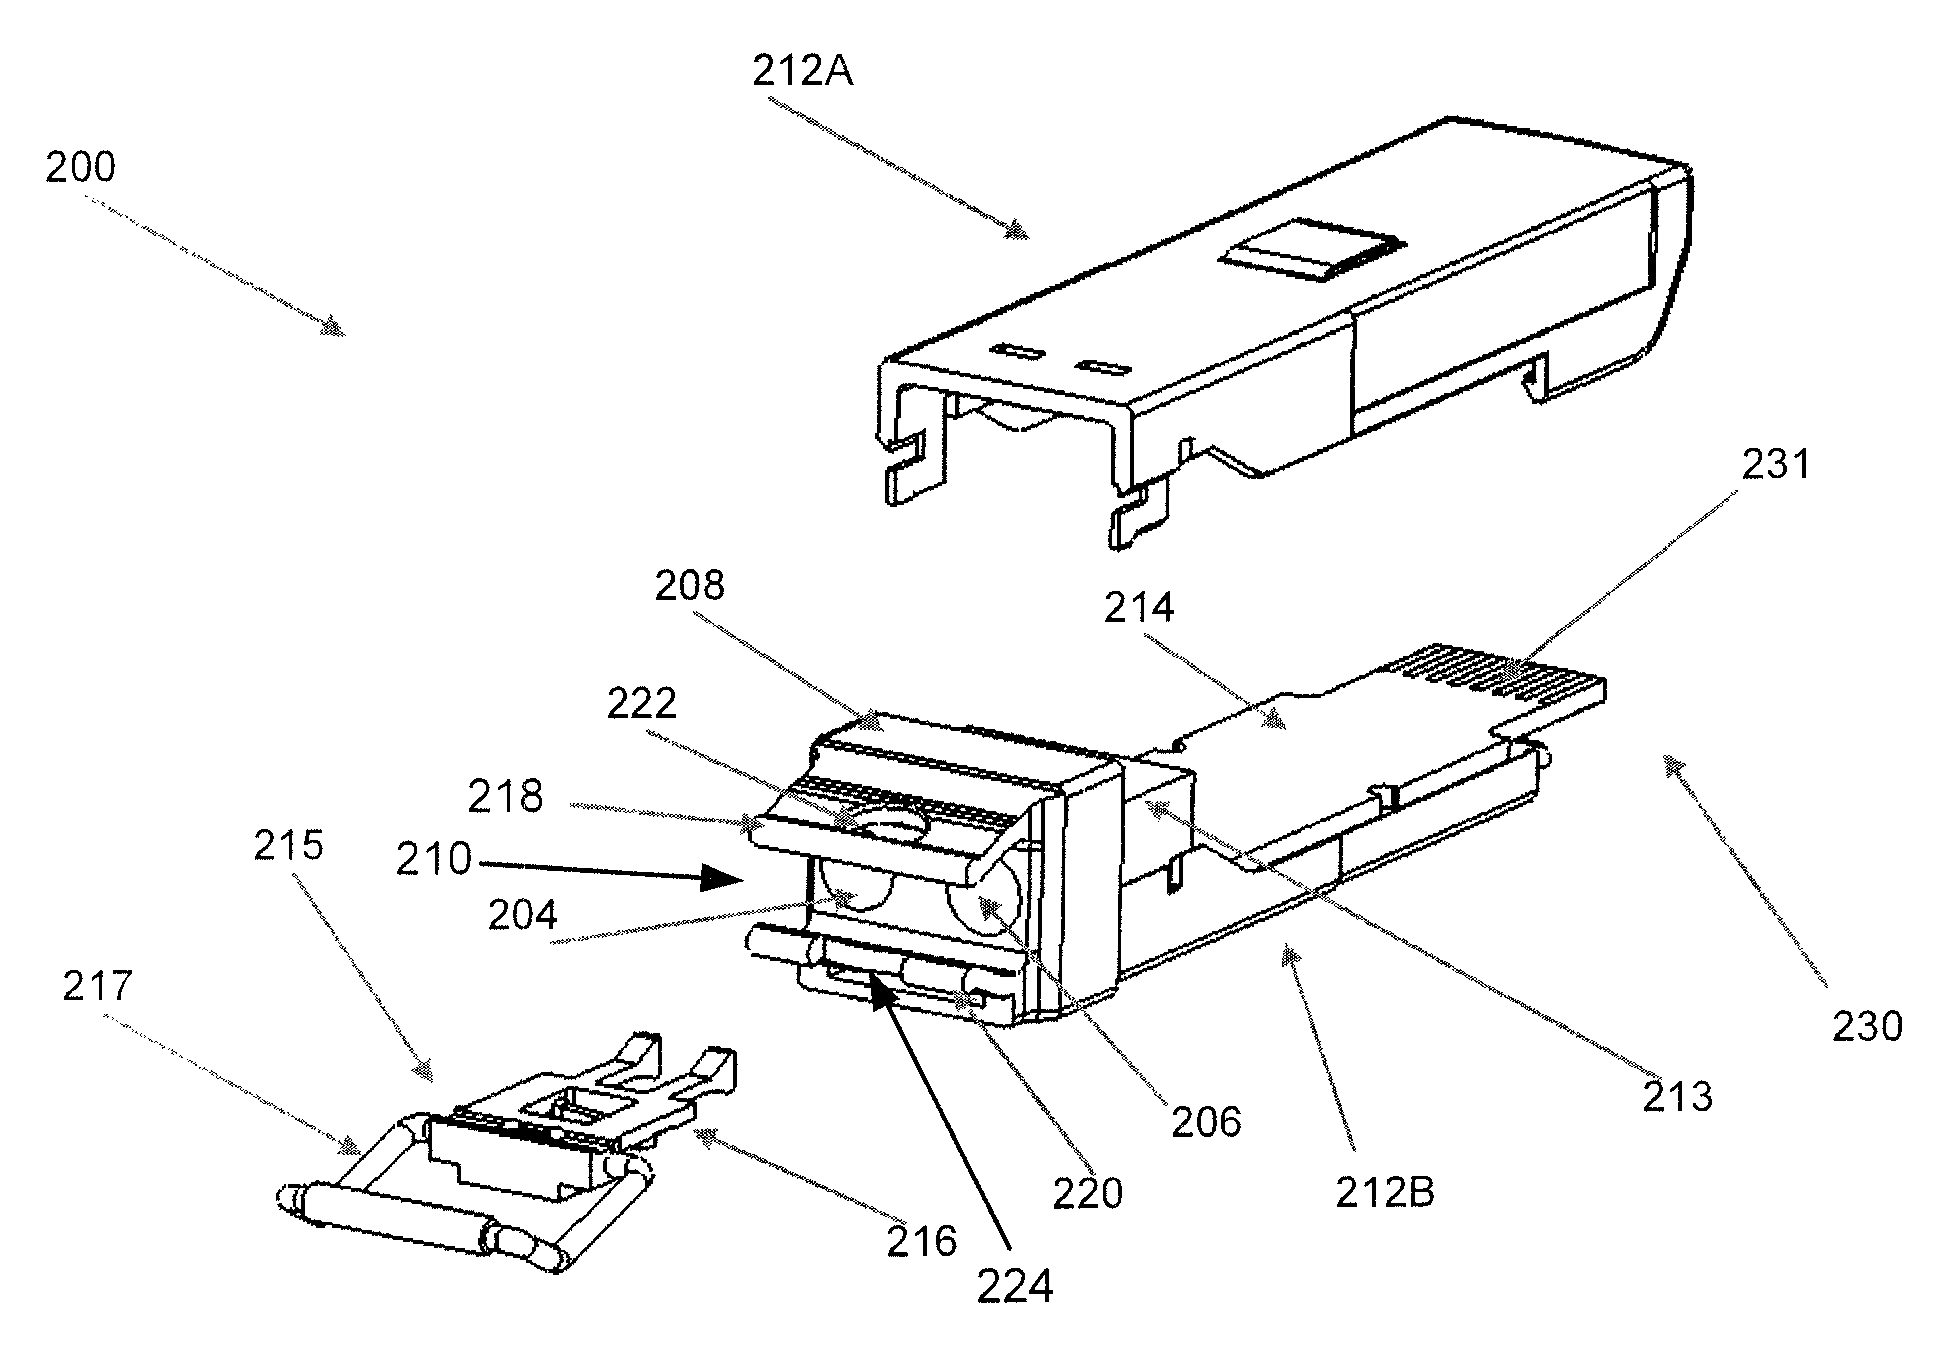 Small form factor pluggable (SFP) optical transceiver module and method